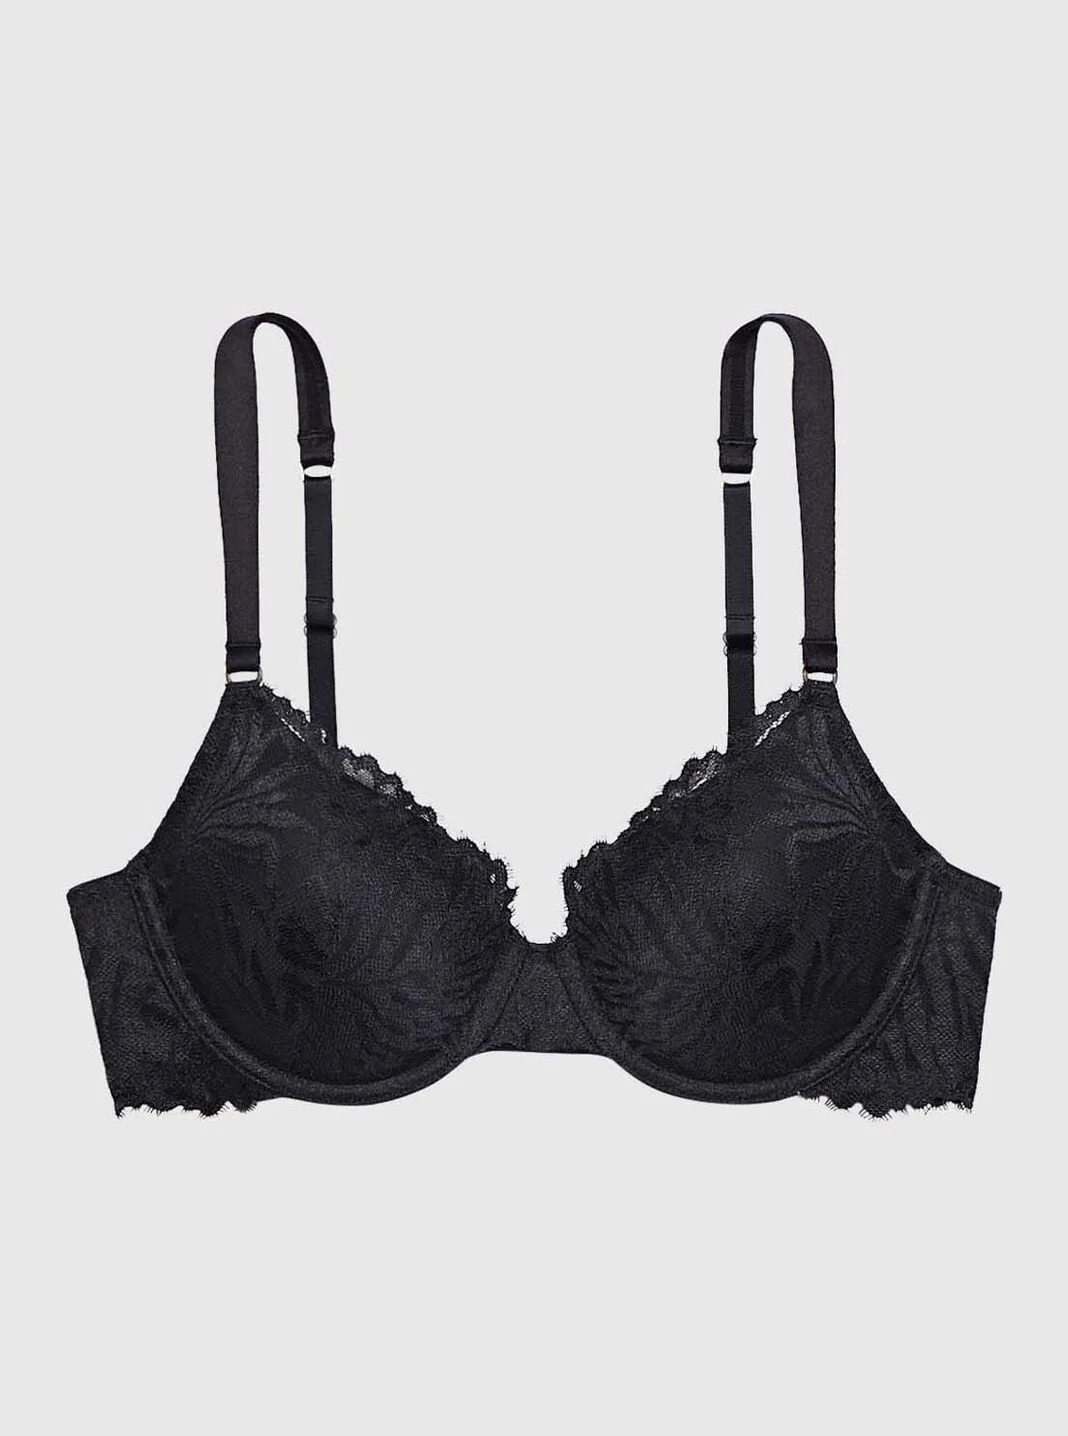 Best Bodykiss Bra 32d for sale in Victoria, British Columbia for 2024